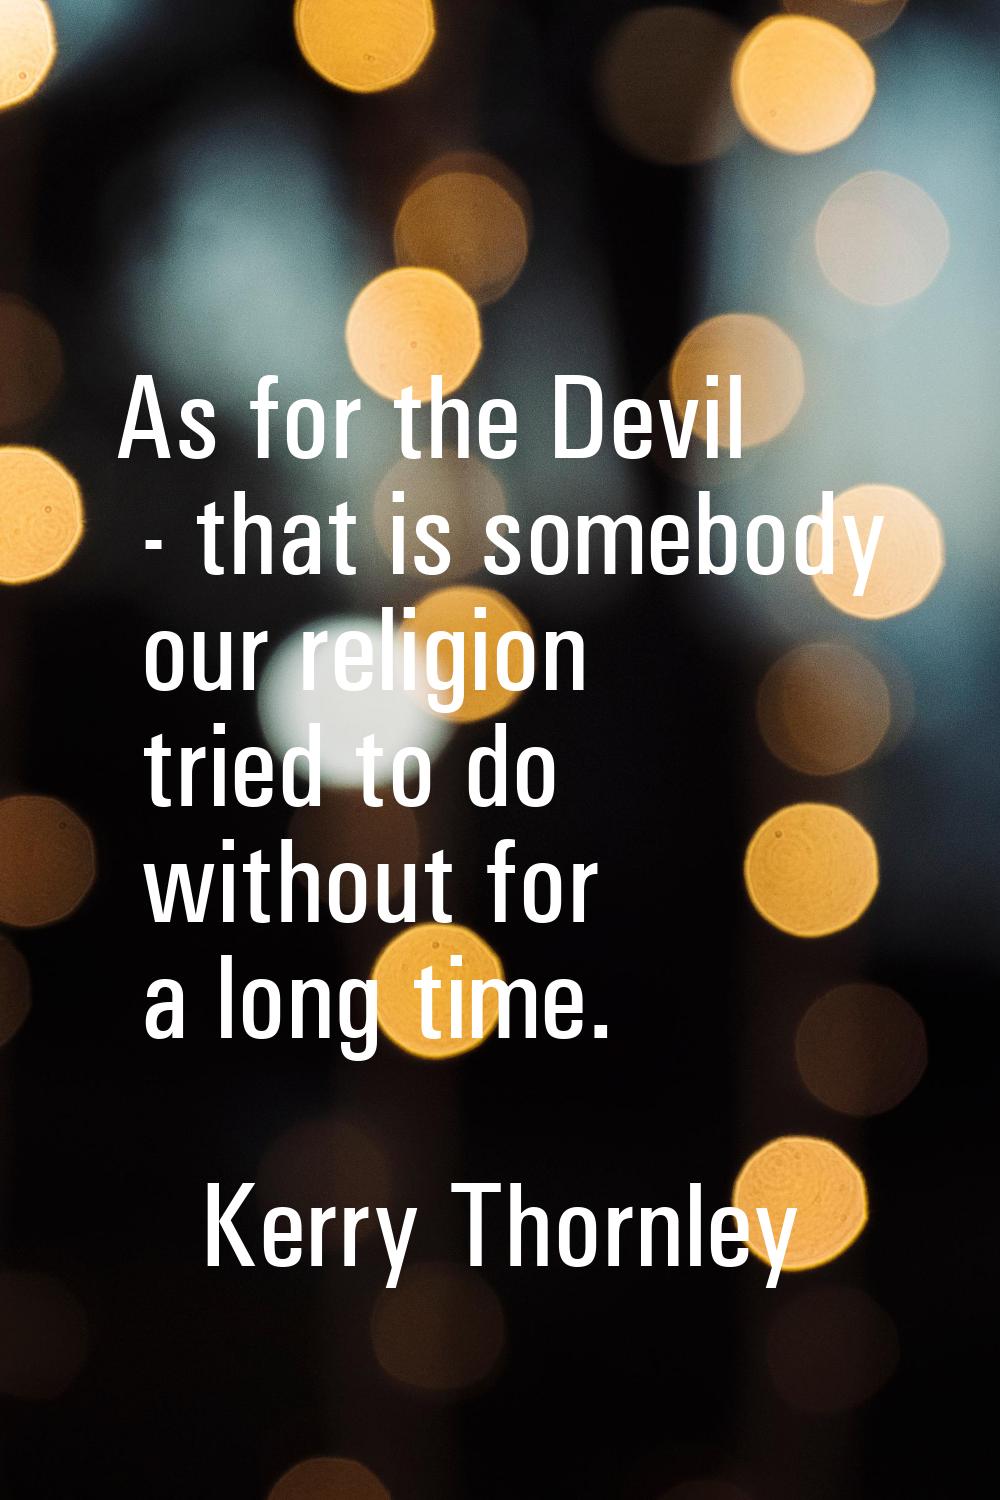 As for the Devil - that is somebody our religion tried to do without for a long time.